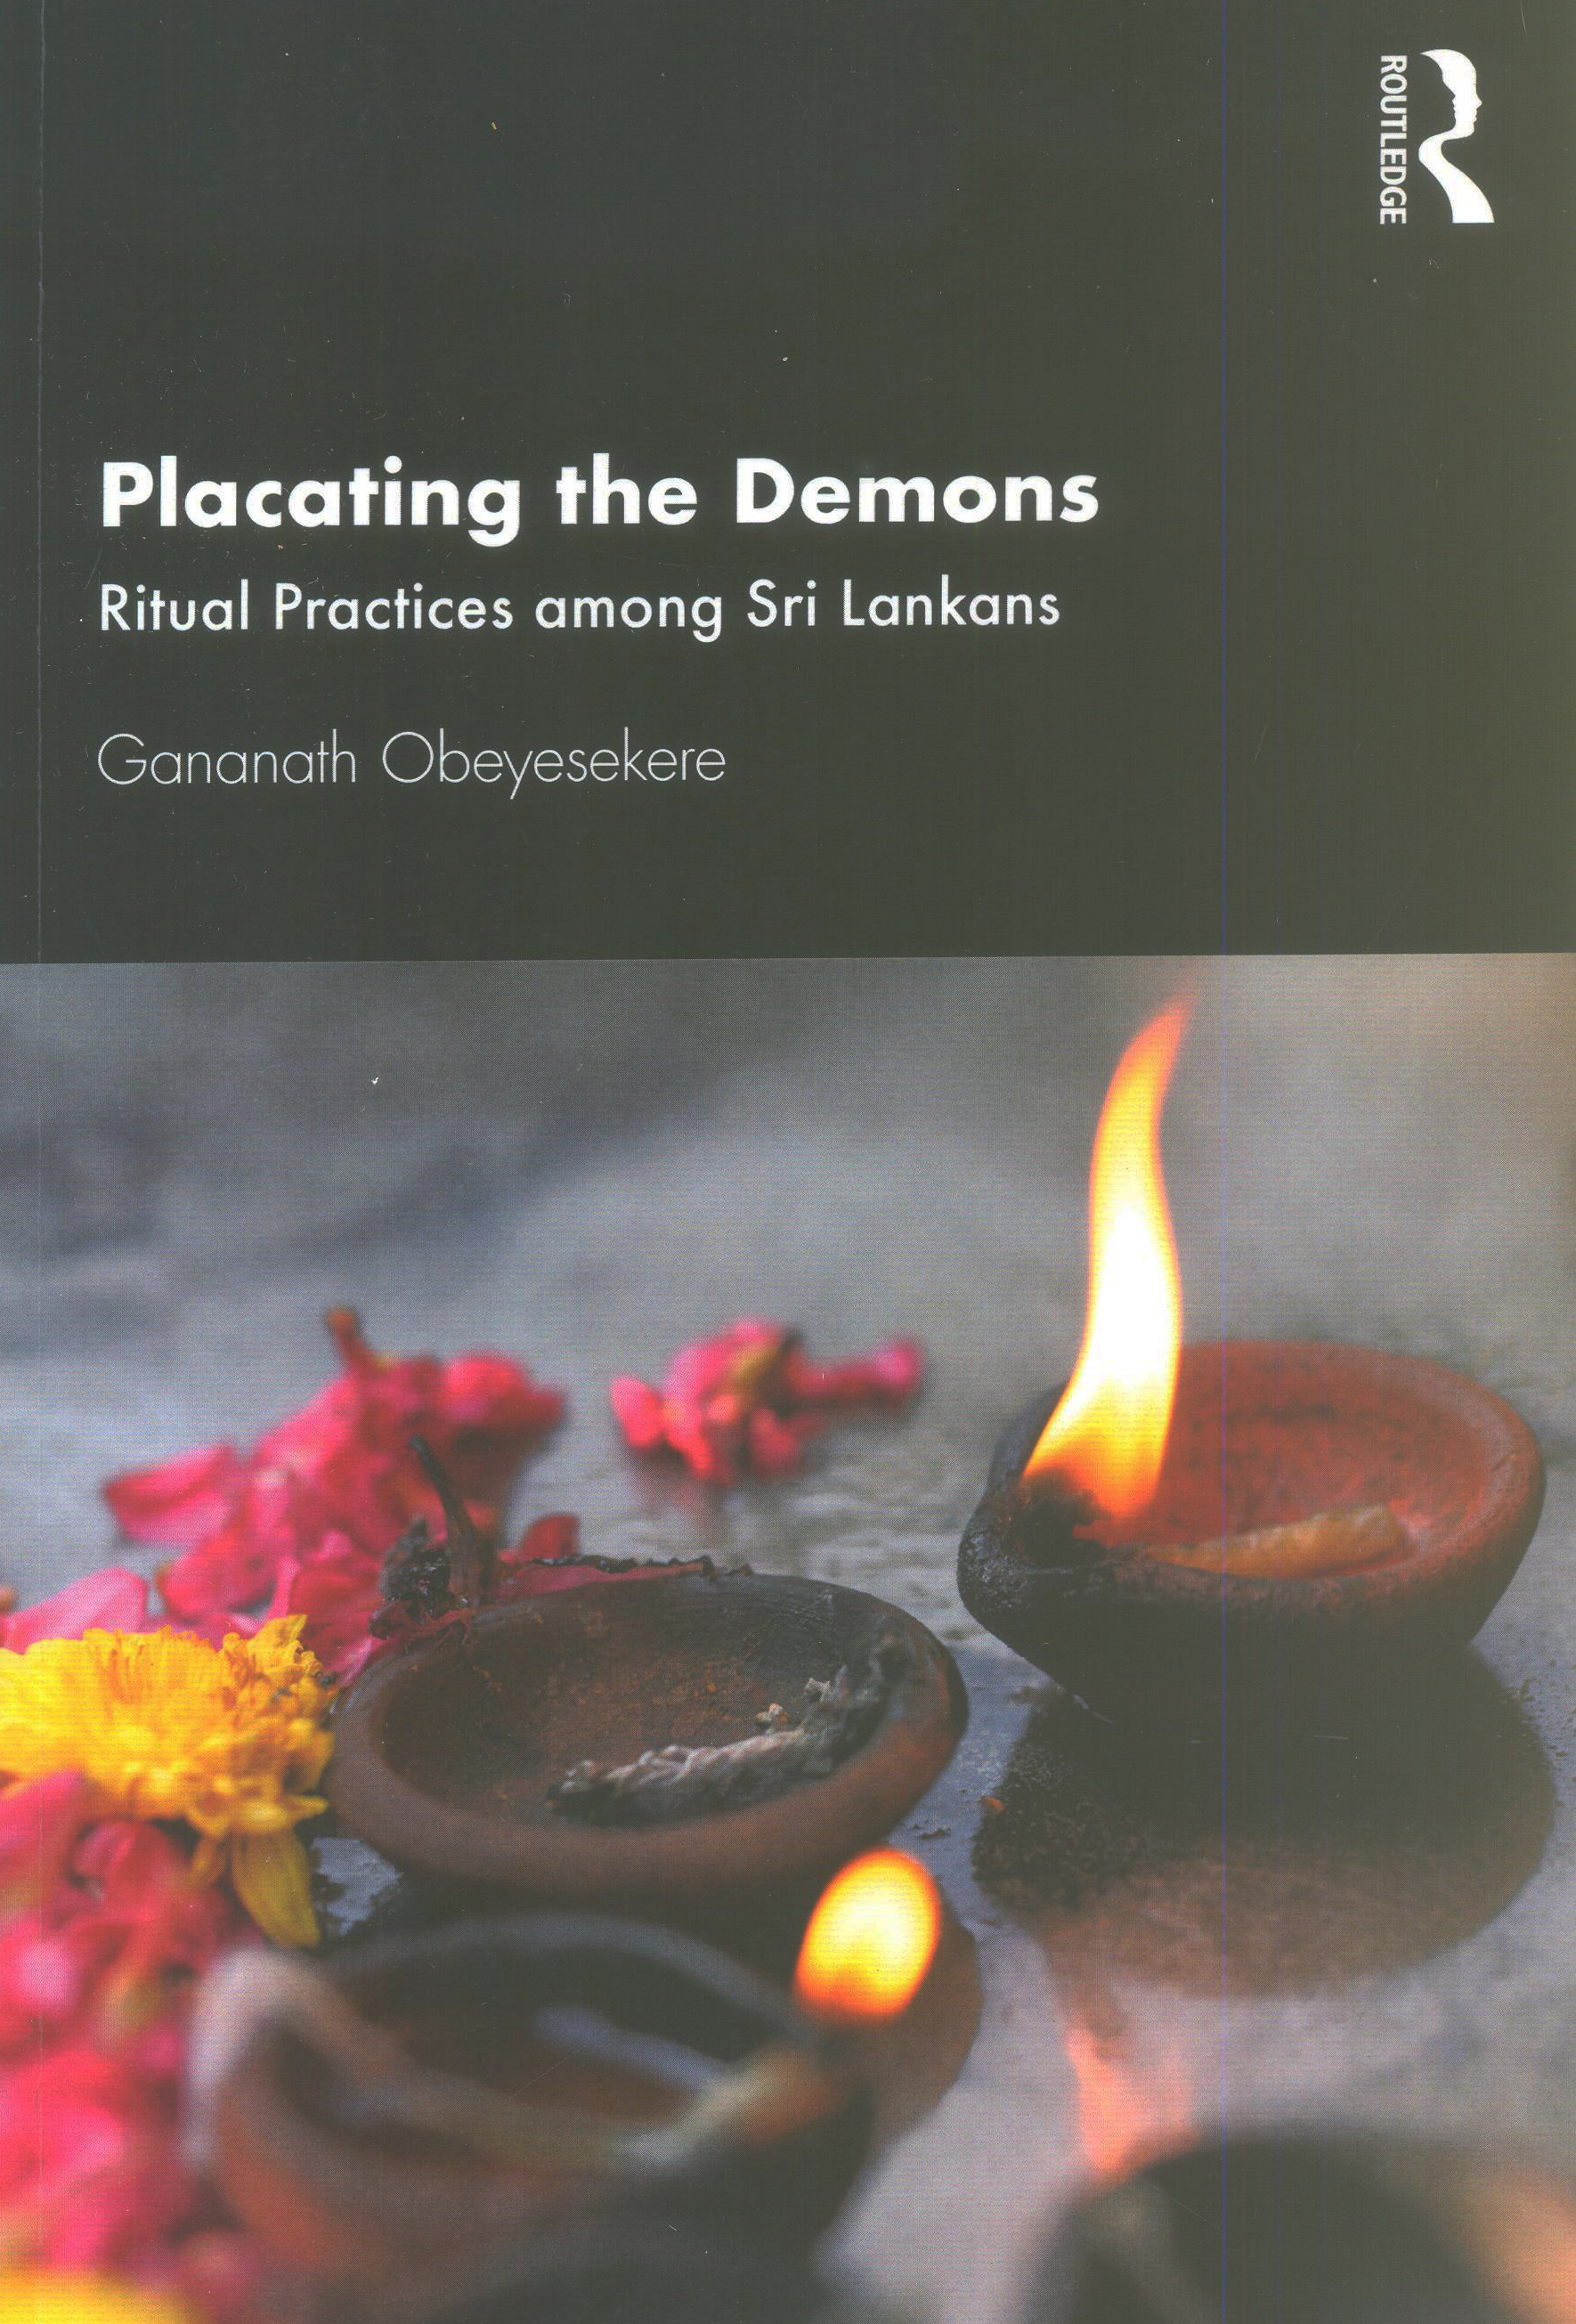 Placating the Demons